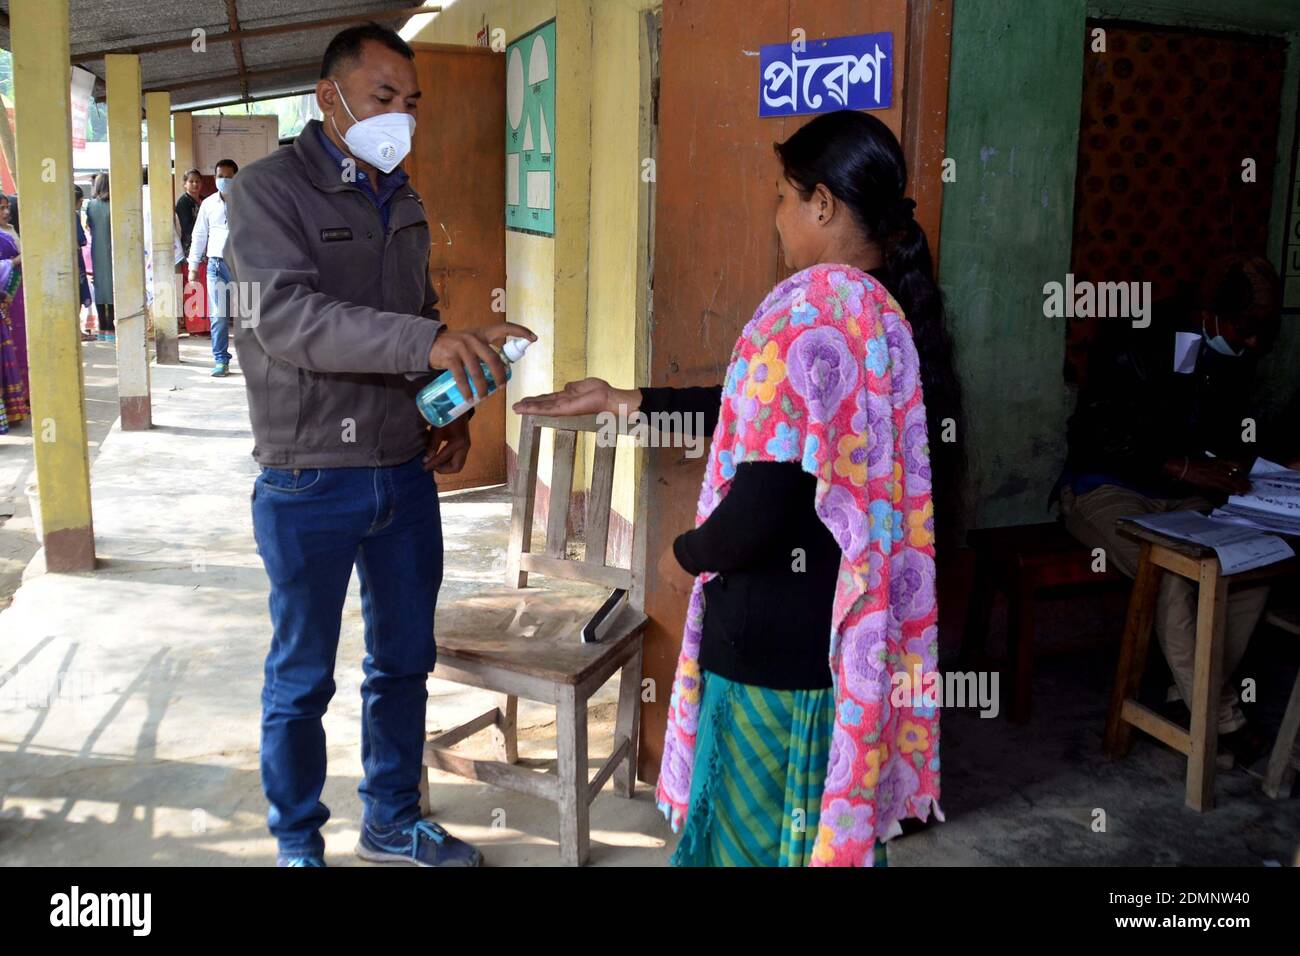 Nagaon, Assam, India - 17  December 2020: A  health worker spraying hand sanitizer to all voters standing in queue due to Covid - 19 pandemic at a Polling station during the Tiwa Autonomous Council election in Kachamari village in Nagaon district of Assam, India.        Credit: DIGANTA TALUKDAR/Alamy Live News Stock Photo